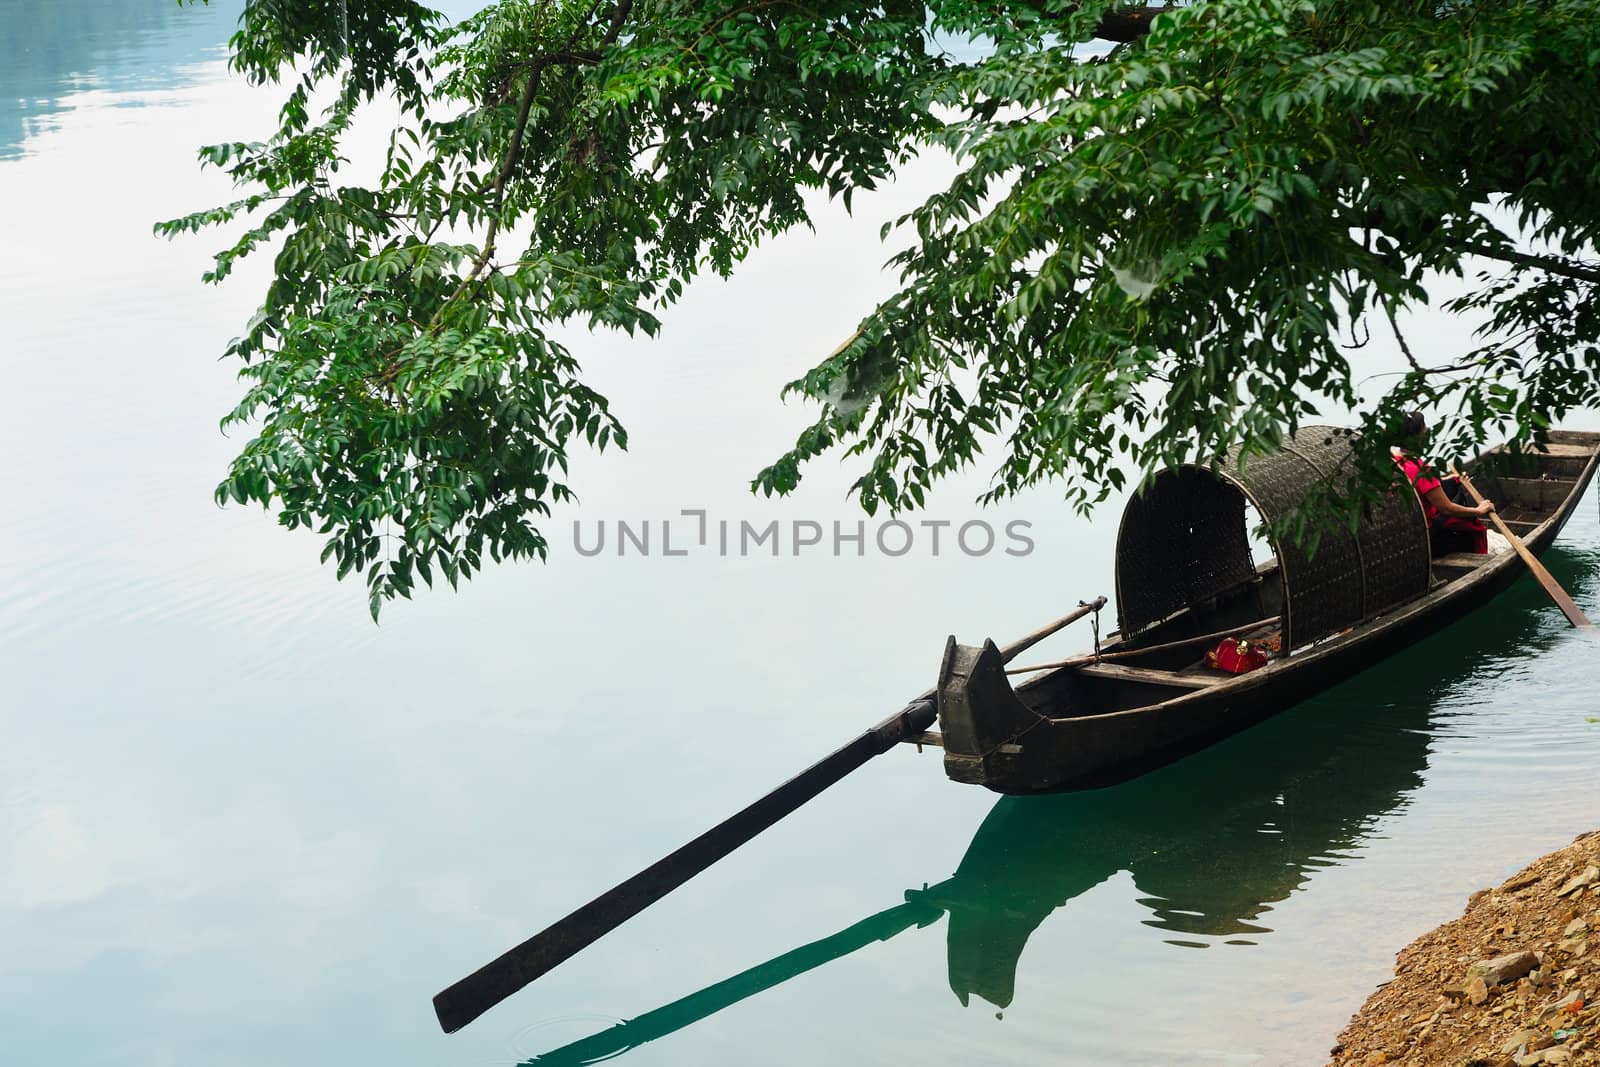 Fishing boat on the river under the tree in Hunan province of China